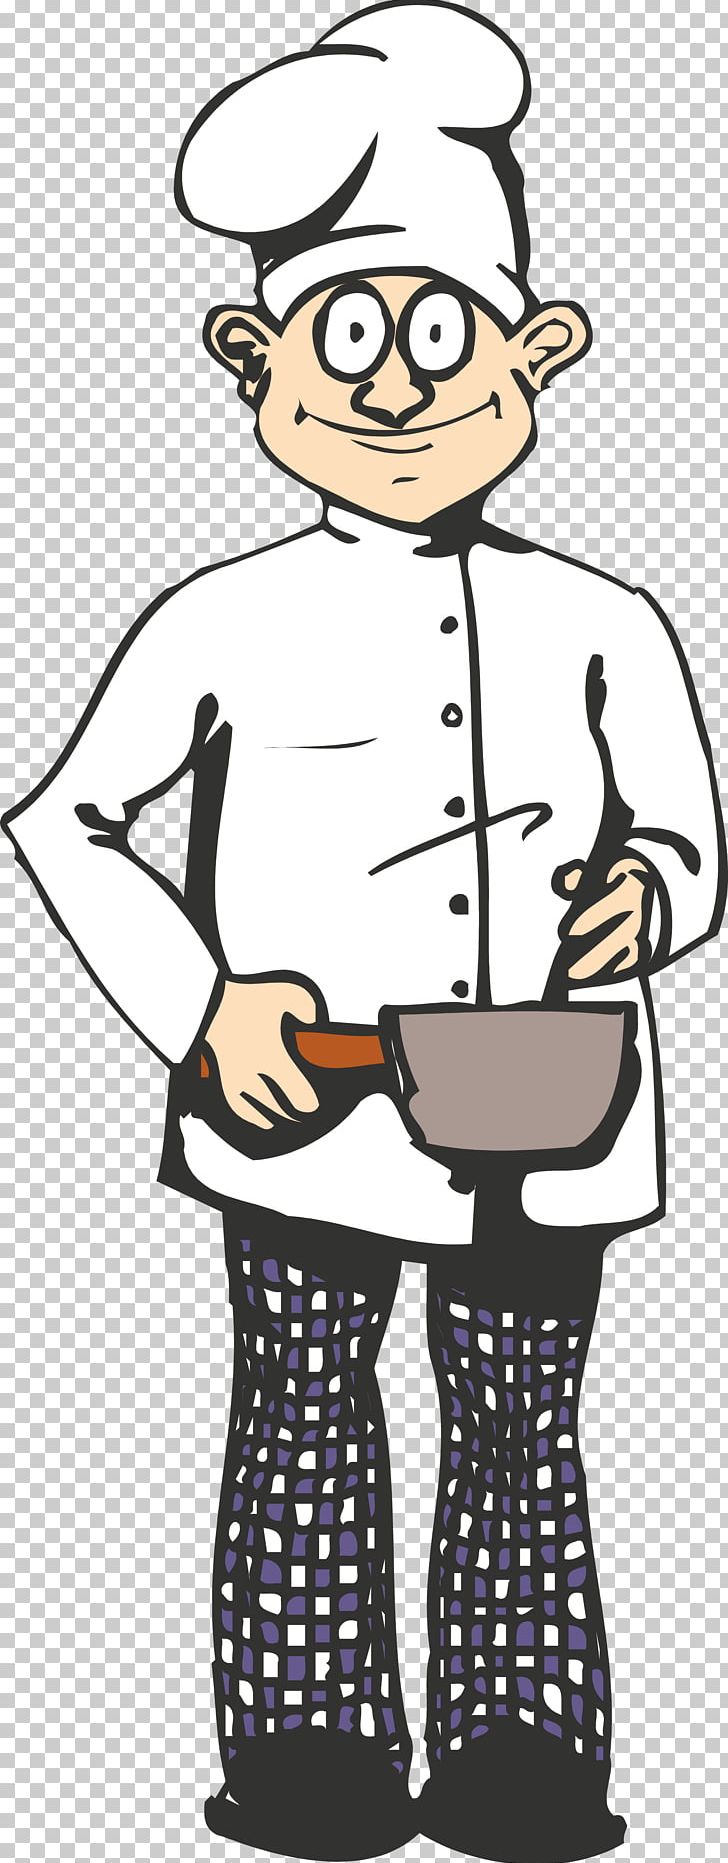 Cook Food Menu PNG, Clipart, Art, Artwork, Black And White, Cartoon, Clothing Free PNG Download